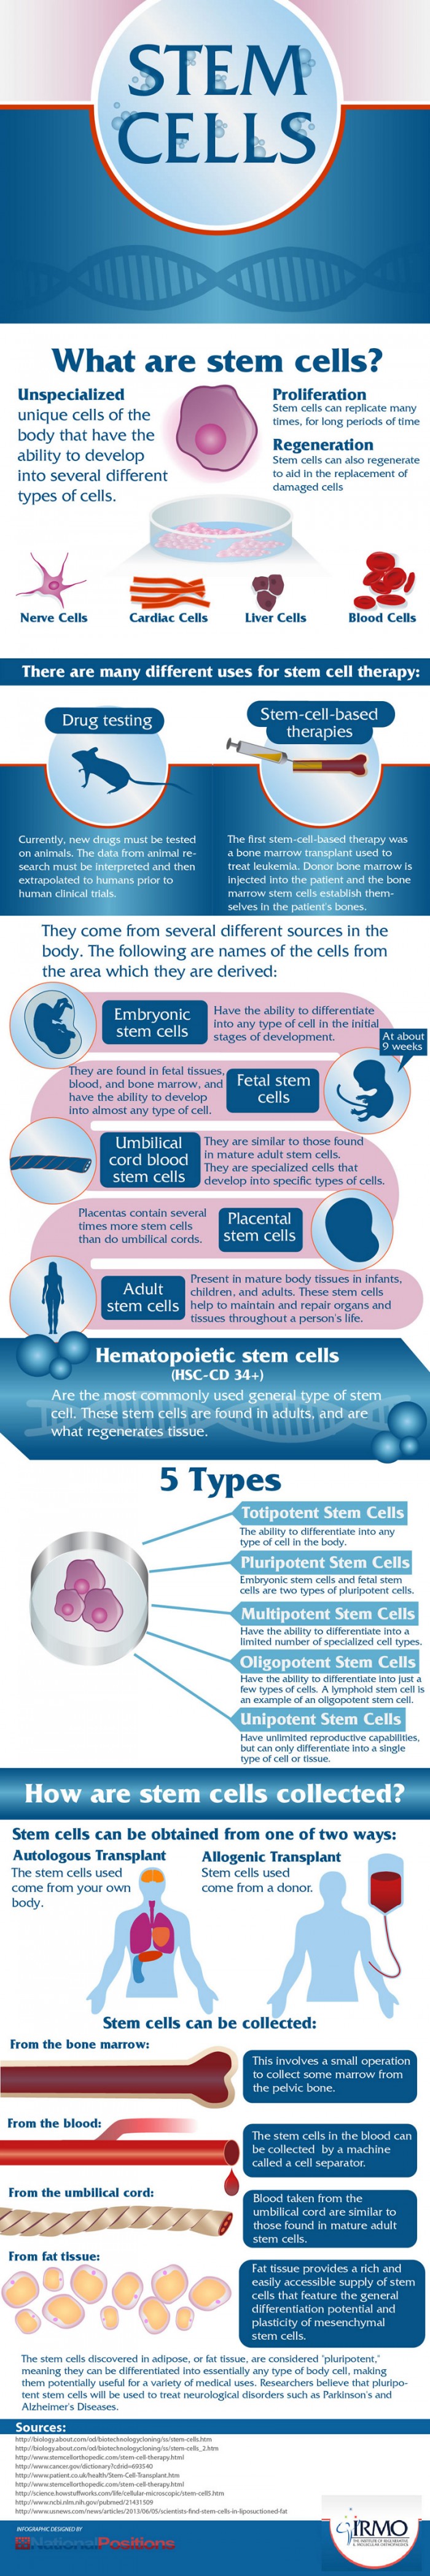 Guide to Stem Cells - HRF